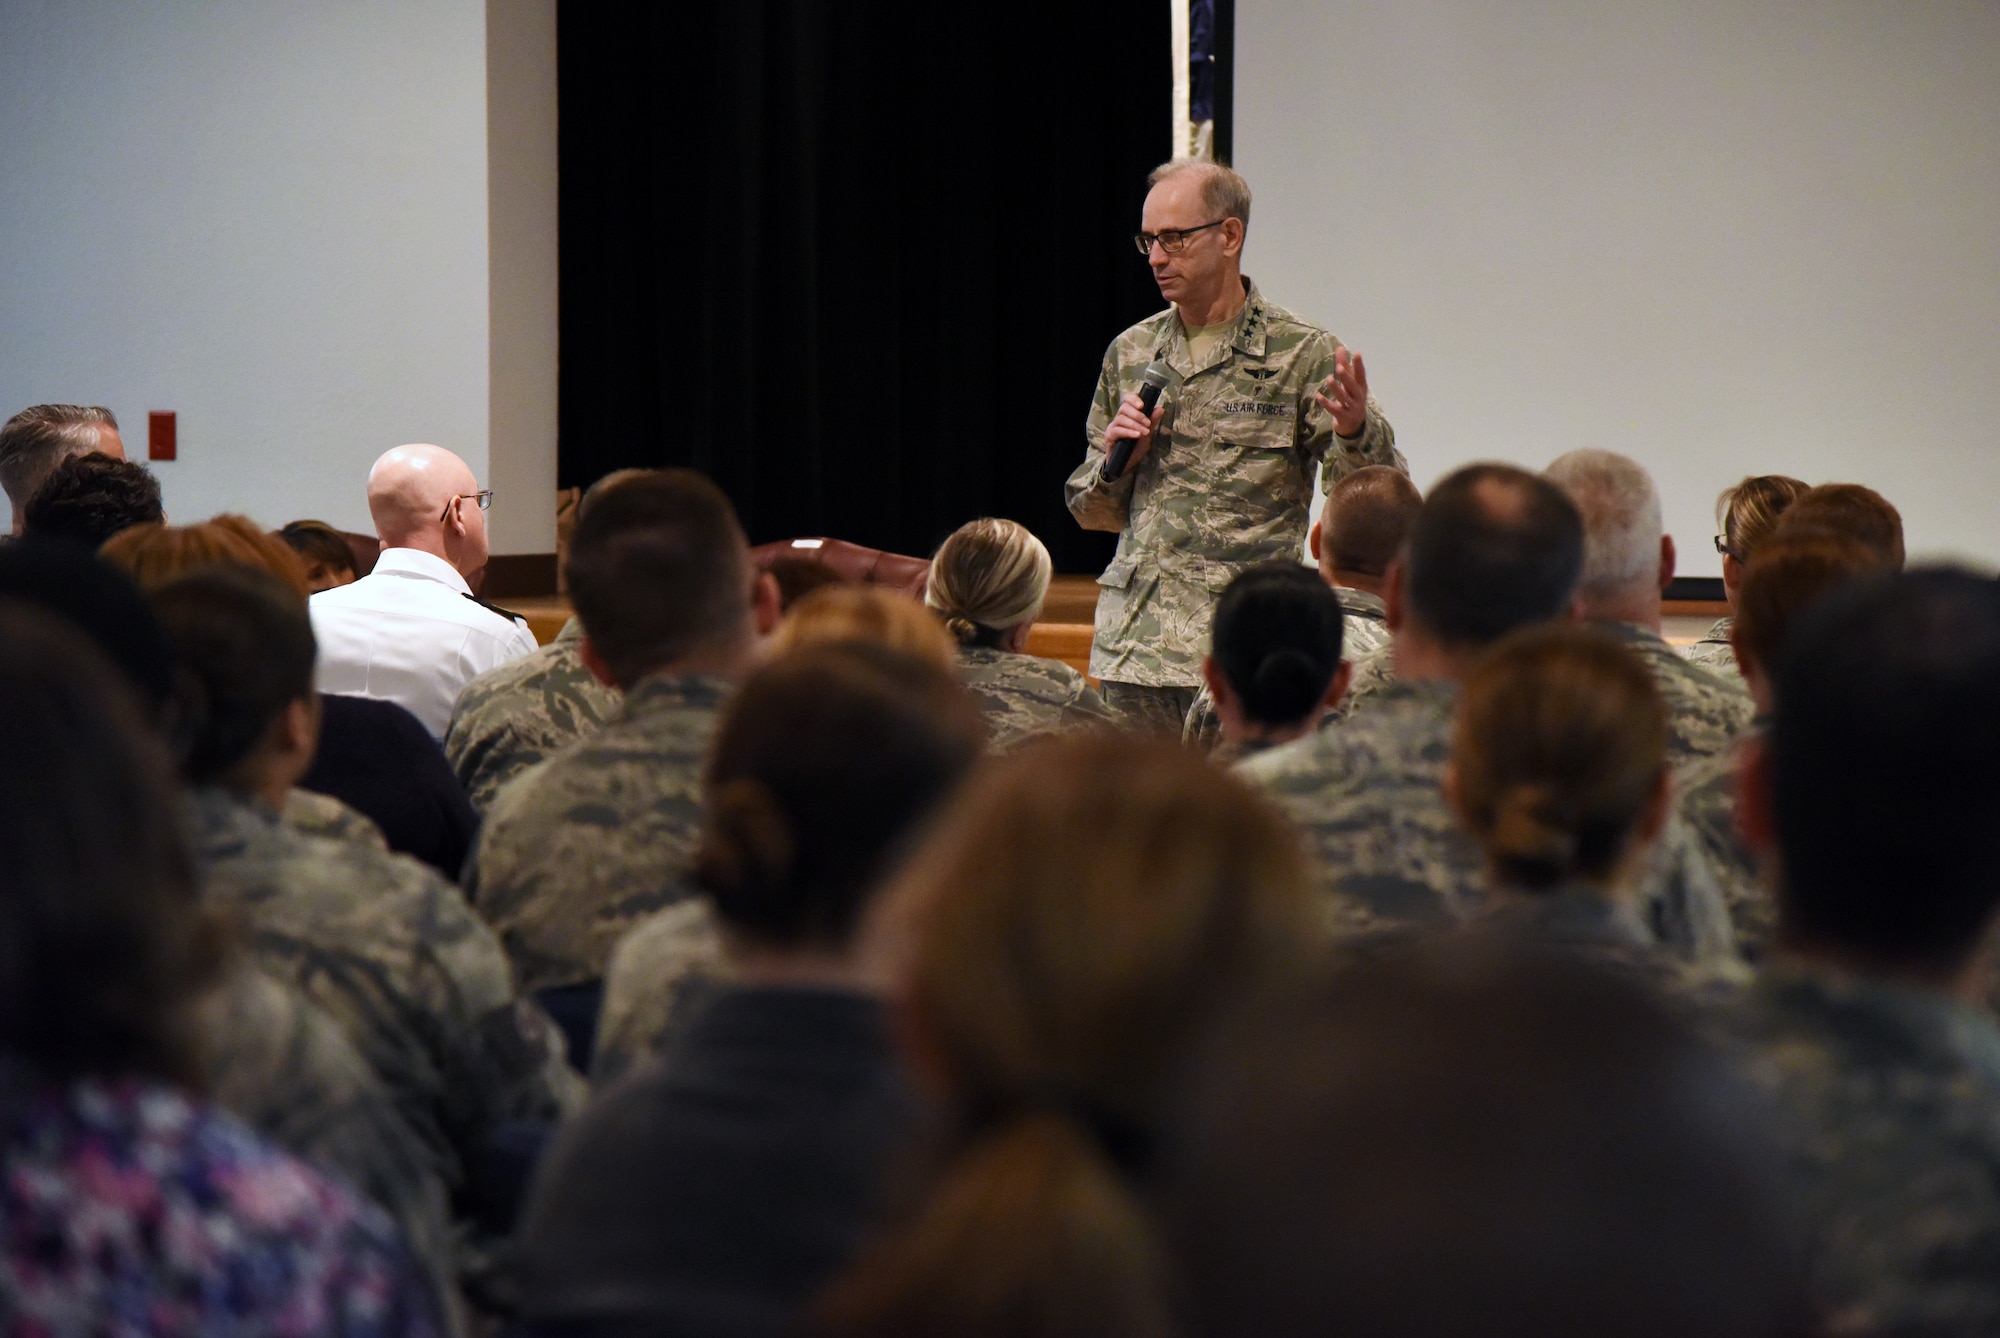 U.S. Air Force Lt. Gen. Mark Ediger, Air Force Surgeon General, delivers remarks during a town hall meeting for members of the 81st Medical Group at the Don Wiley Auditorium inside the Keesler Medical Center during a site visit at Keesler Air Force Base, Mississippi, April 27, 2018. The purpose of the visit was to get oriented with base operations and the Keesler Medical Center. The visit also included an office call with 2nd Air Force leadership and tours of the Clinical Research Lab and the newly renovated 81st Dental Squadron clinic. (U.S. Air Force photo by Kemberly Groue)